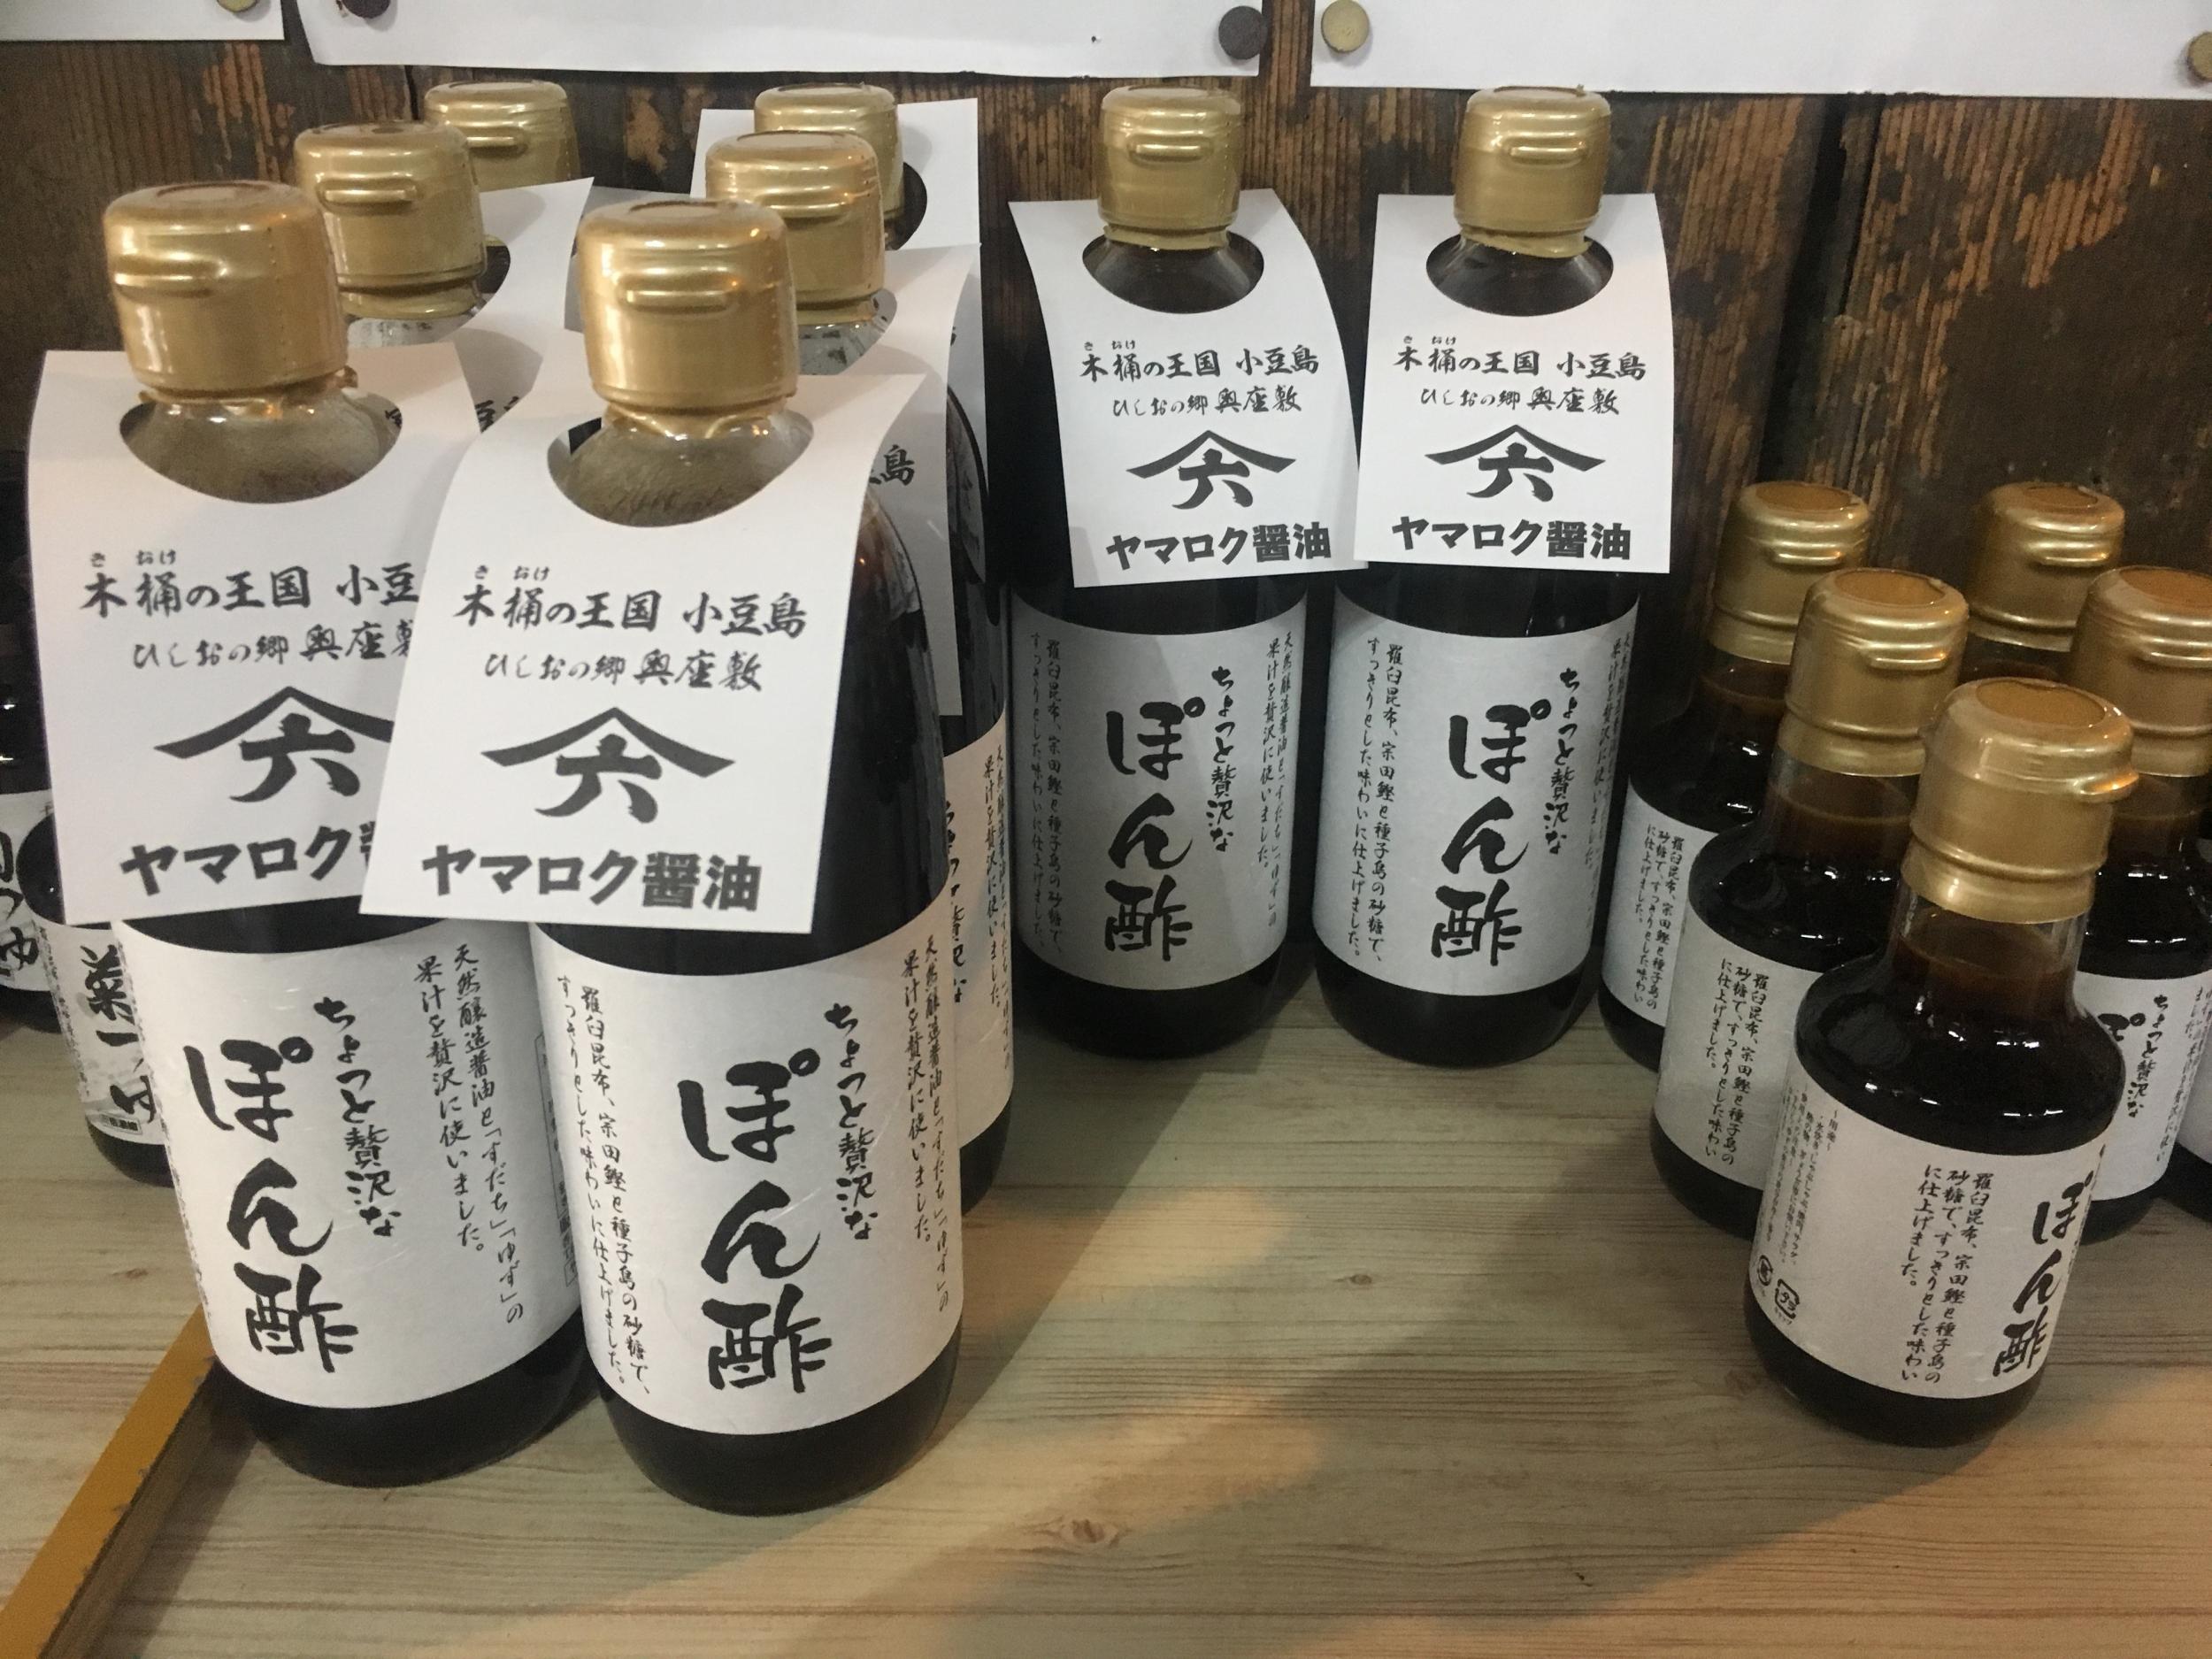 Message on a bottle: Yamahisa has been around since 1932